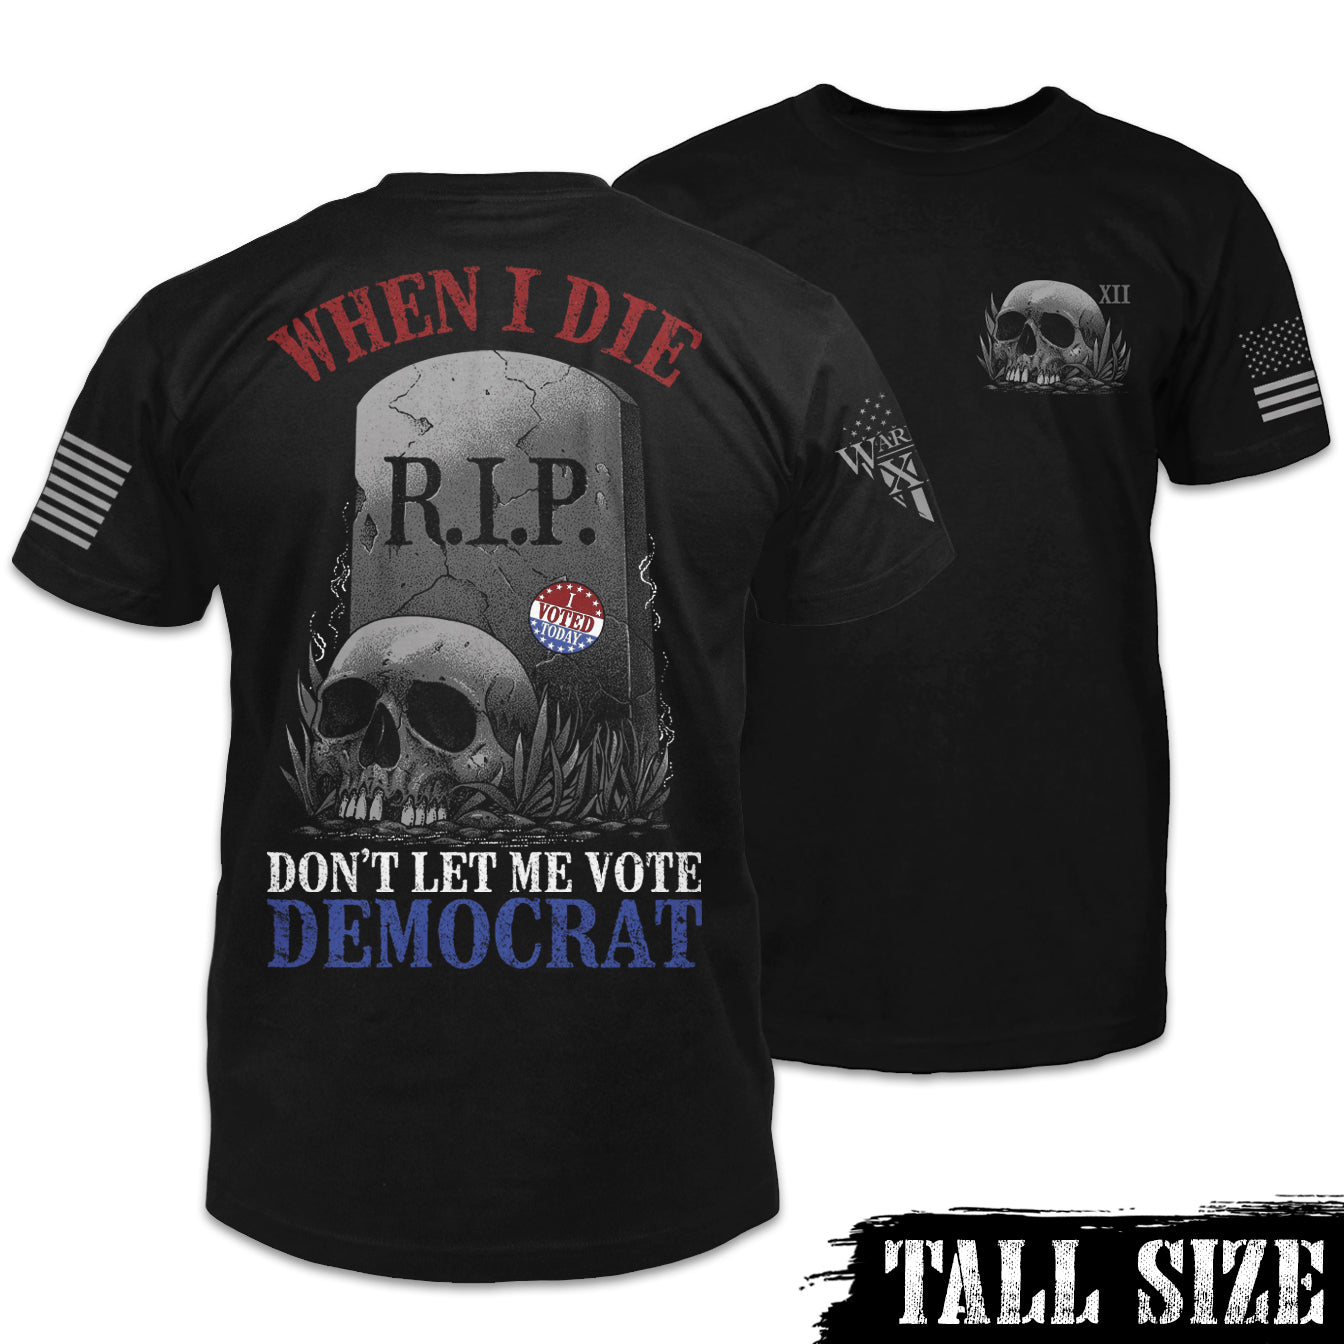 Front and back black tall size shirt with the words "When I die, don't let me vote Democrat" with a gravestone and a skull printed on the shirt.